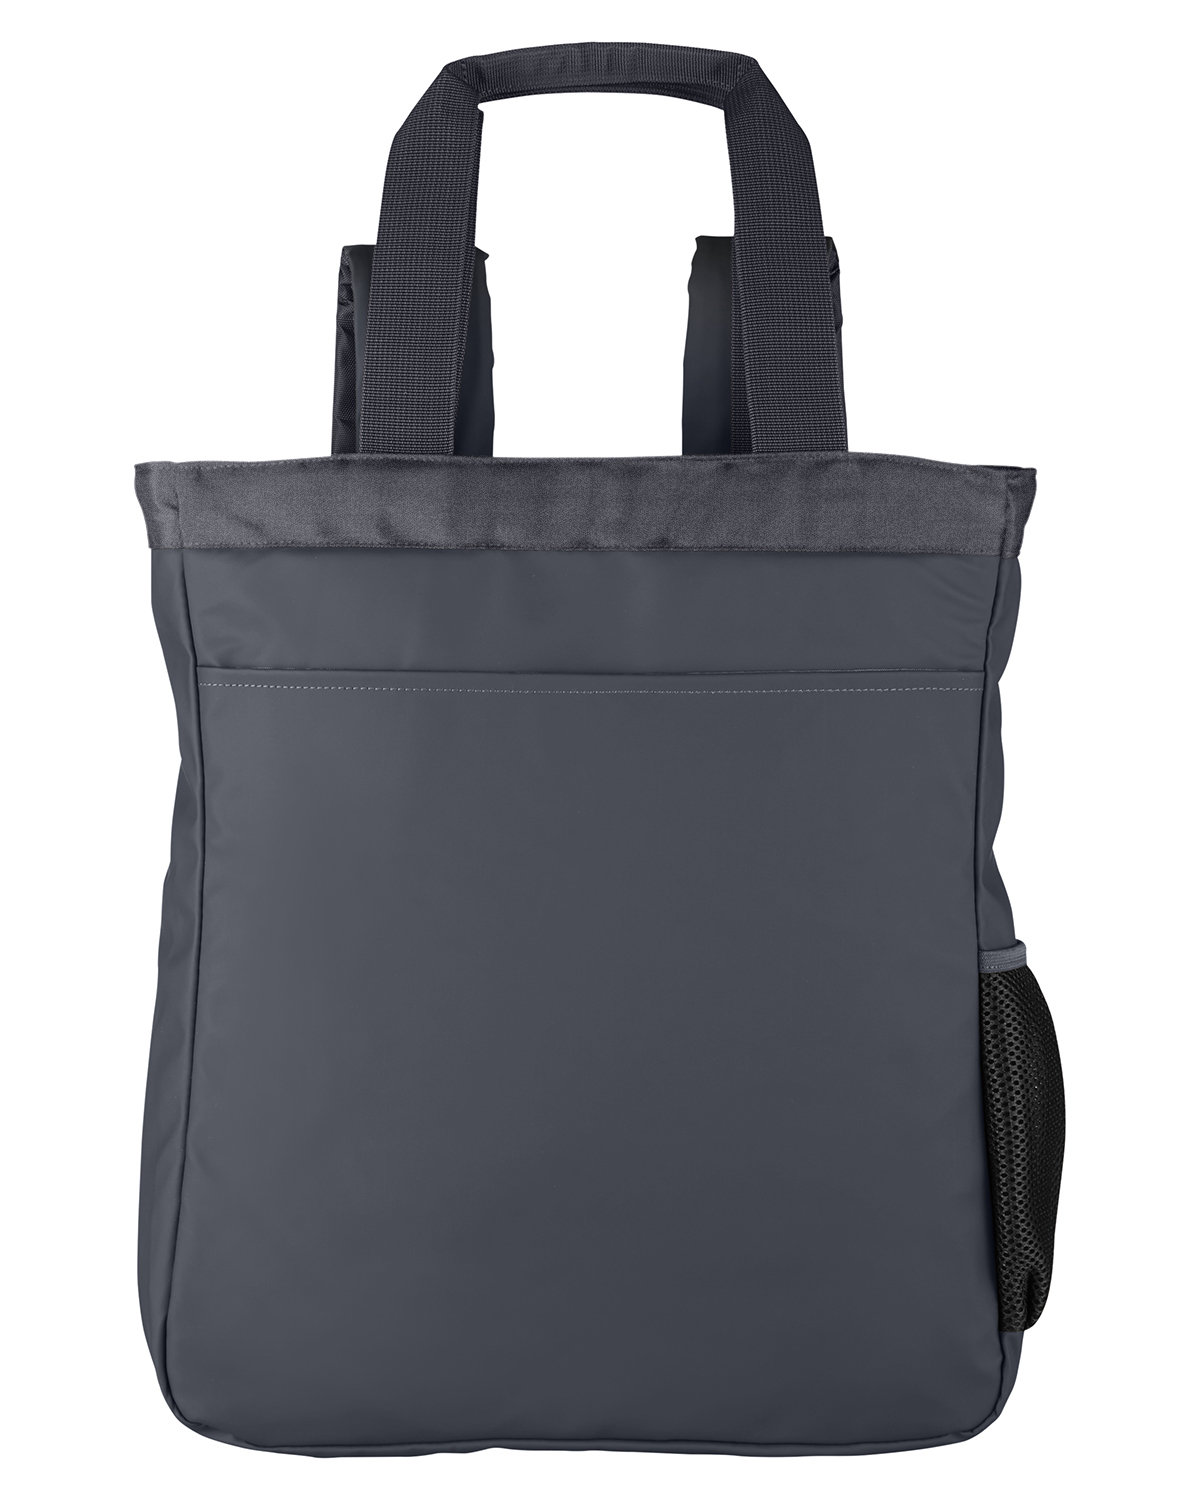 North End Convertible Backpack Tote CARBON 